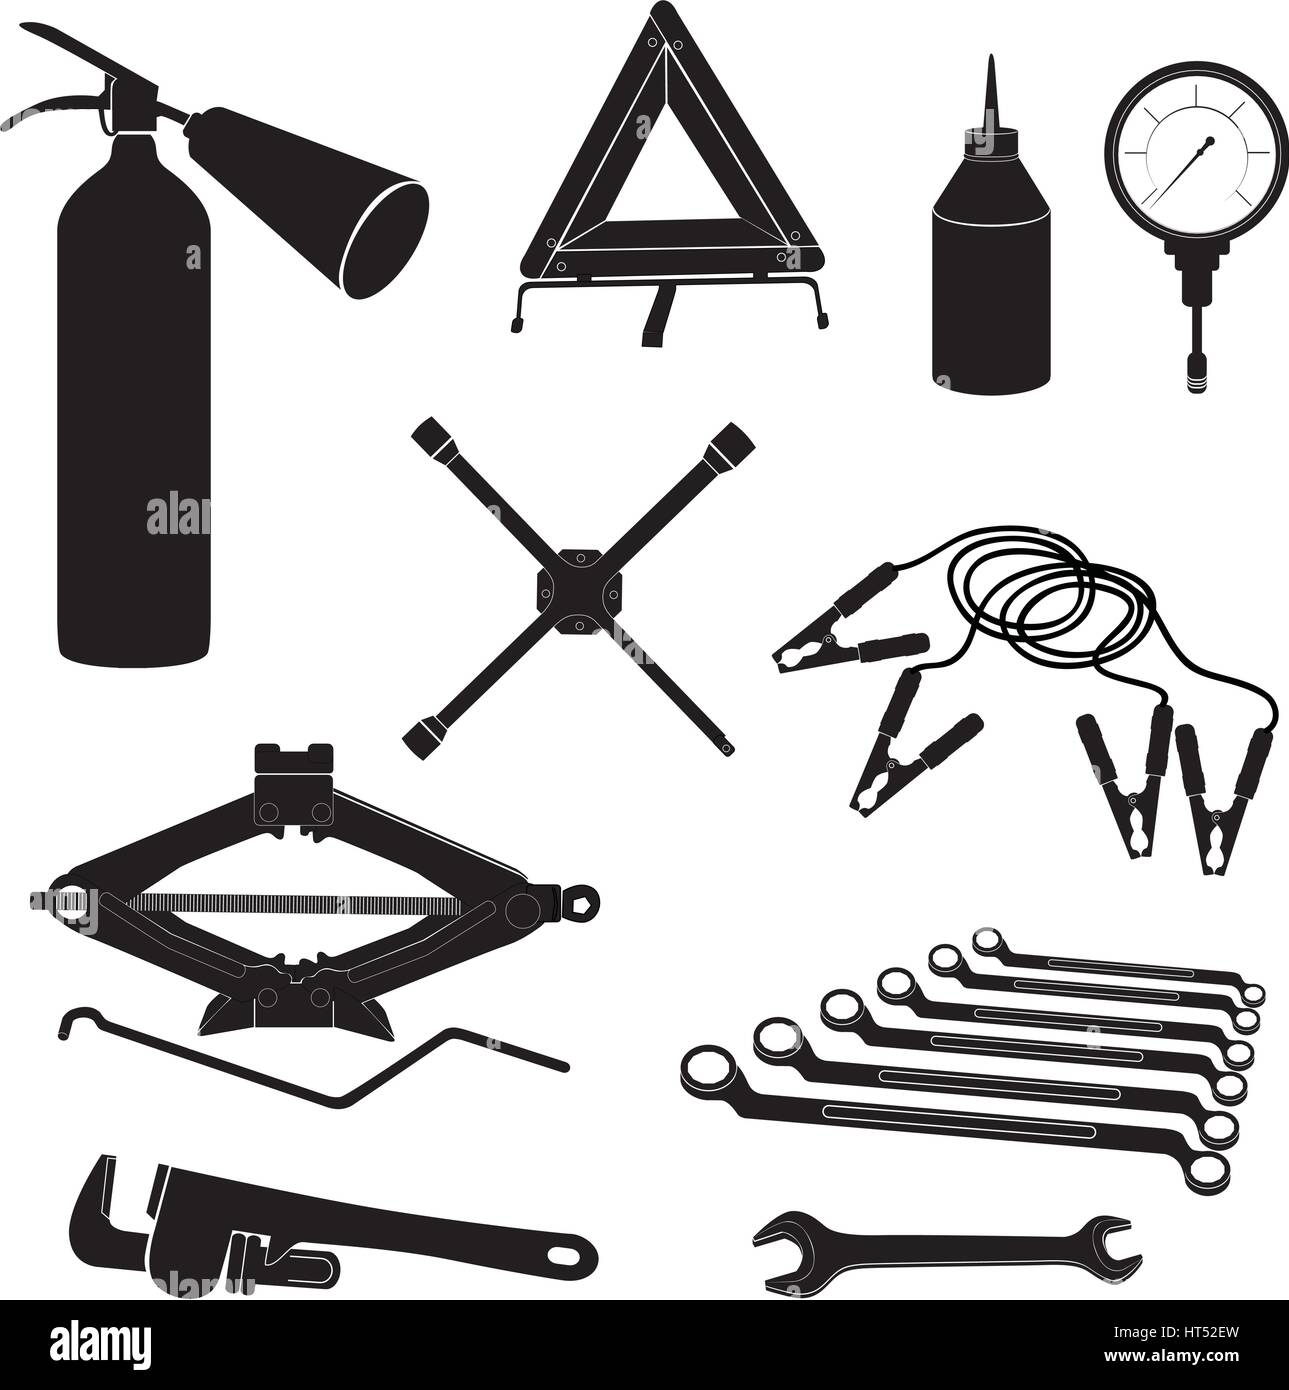 Workshop garage equipment, mechanic tools to repair engine, change tires,  road safety sign, and emergency call vector illustration. Trendy red black  thin line icons for car maintenance service. Stock Vector